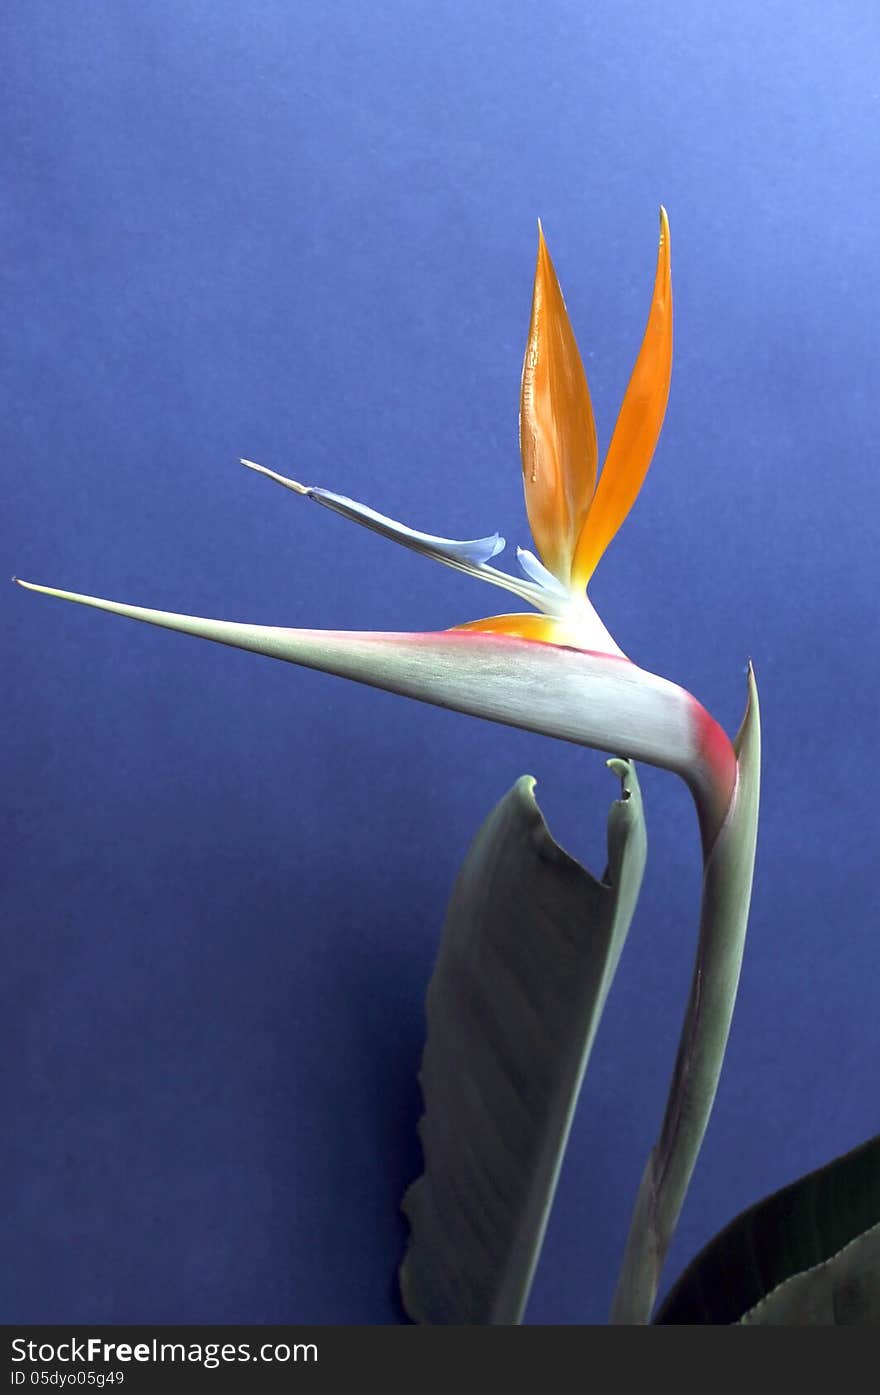 Bird of Paradise flower against a blue background. Strelitzia reginae is a monocotyledonous flowering plant indigenous to South Africa. Common names include Strelitzia, Crane Flower or Bird of Paradise. Photo taken in South Australia. Vertical.